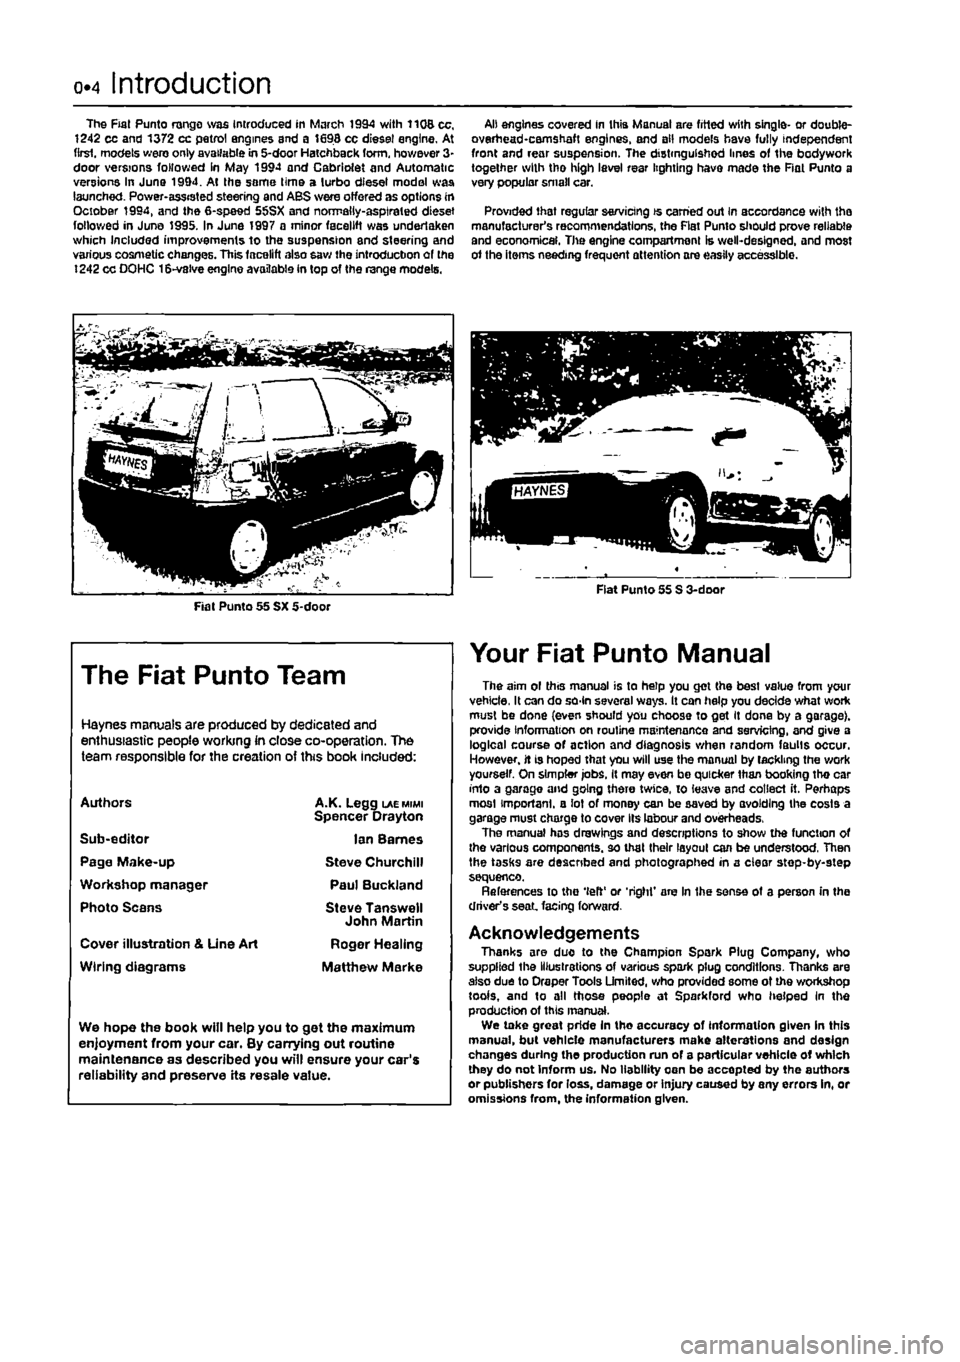 FIAT PUNTO 1994 176 / 1.G Workshop Manual 
0.4 Introduction 
The Fiat Punto range was Introduced in March 1994 with 1106 cc, 1242 cc and 1372 cc petrol engines and a 1698 cc diesel engine. At first, models wero only available in 5-door Hatchb